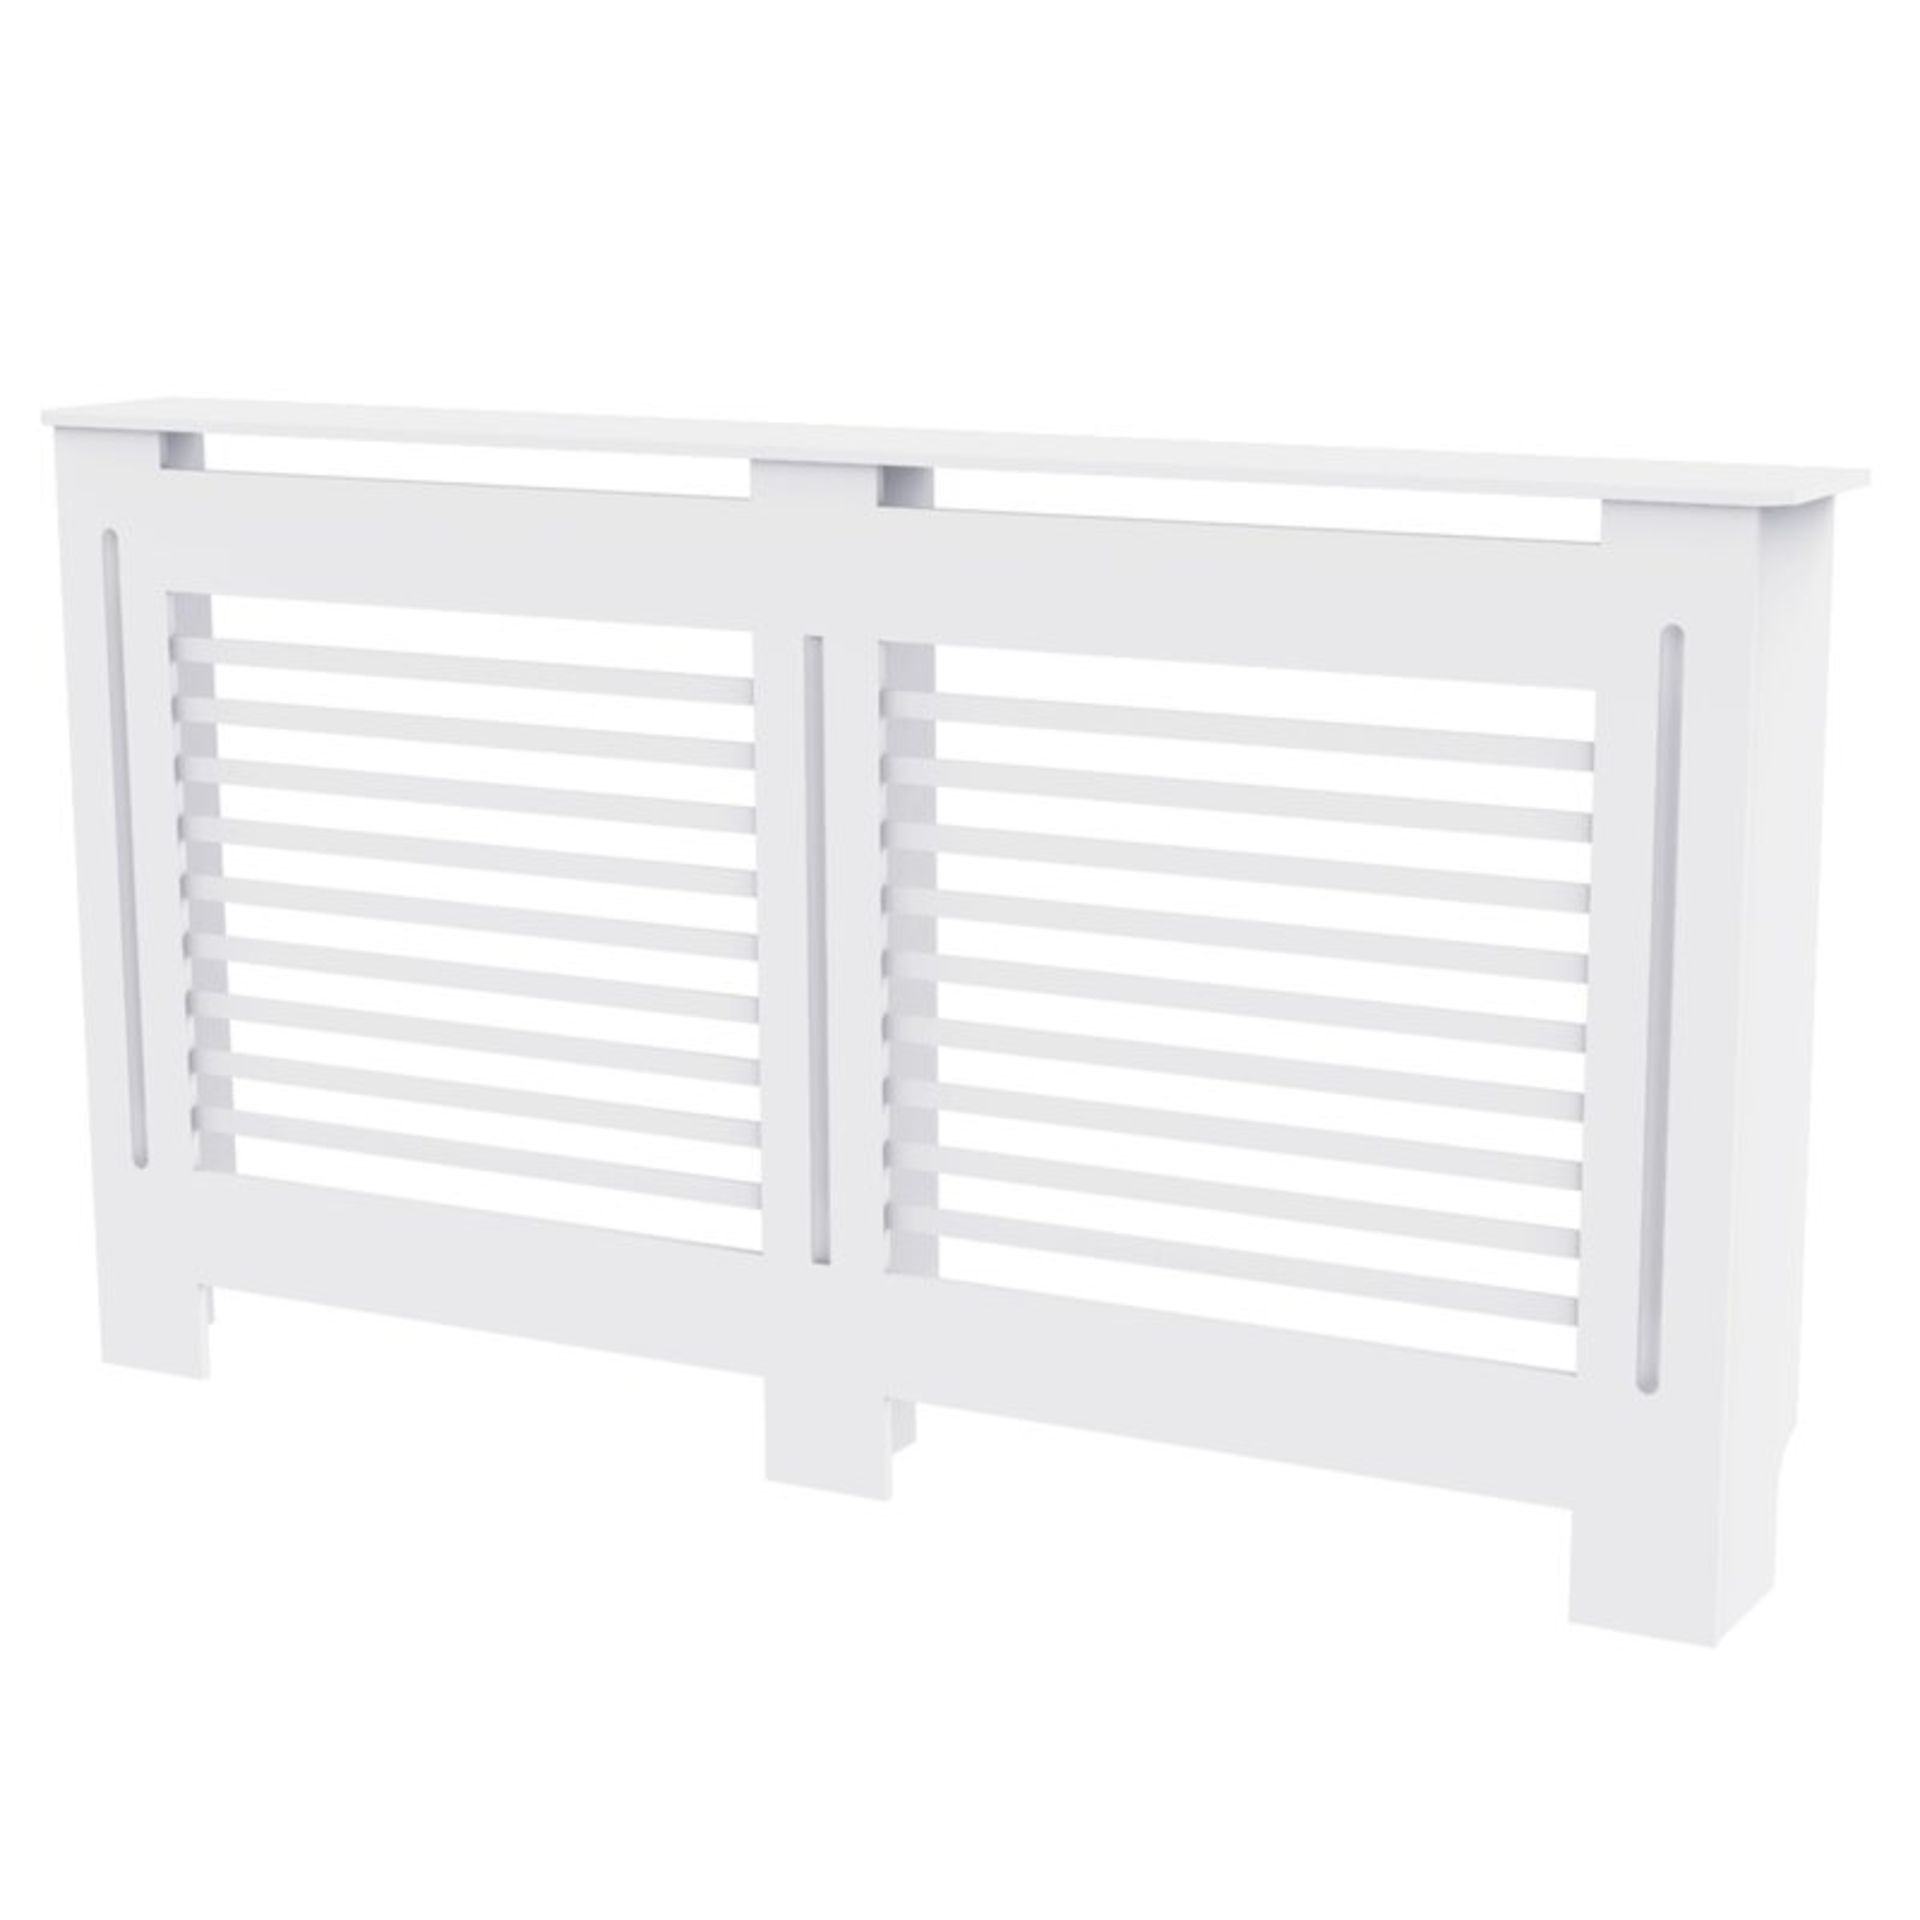 Radiator Cover RRP £55.27 - Image 2 of 2